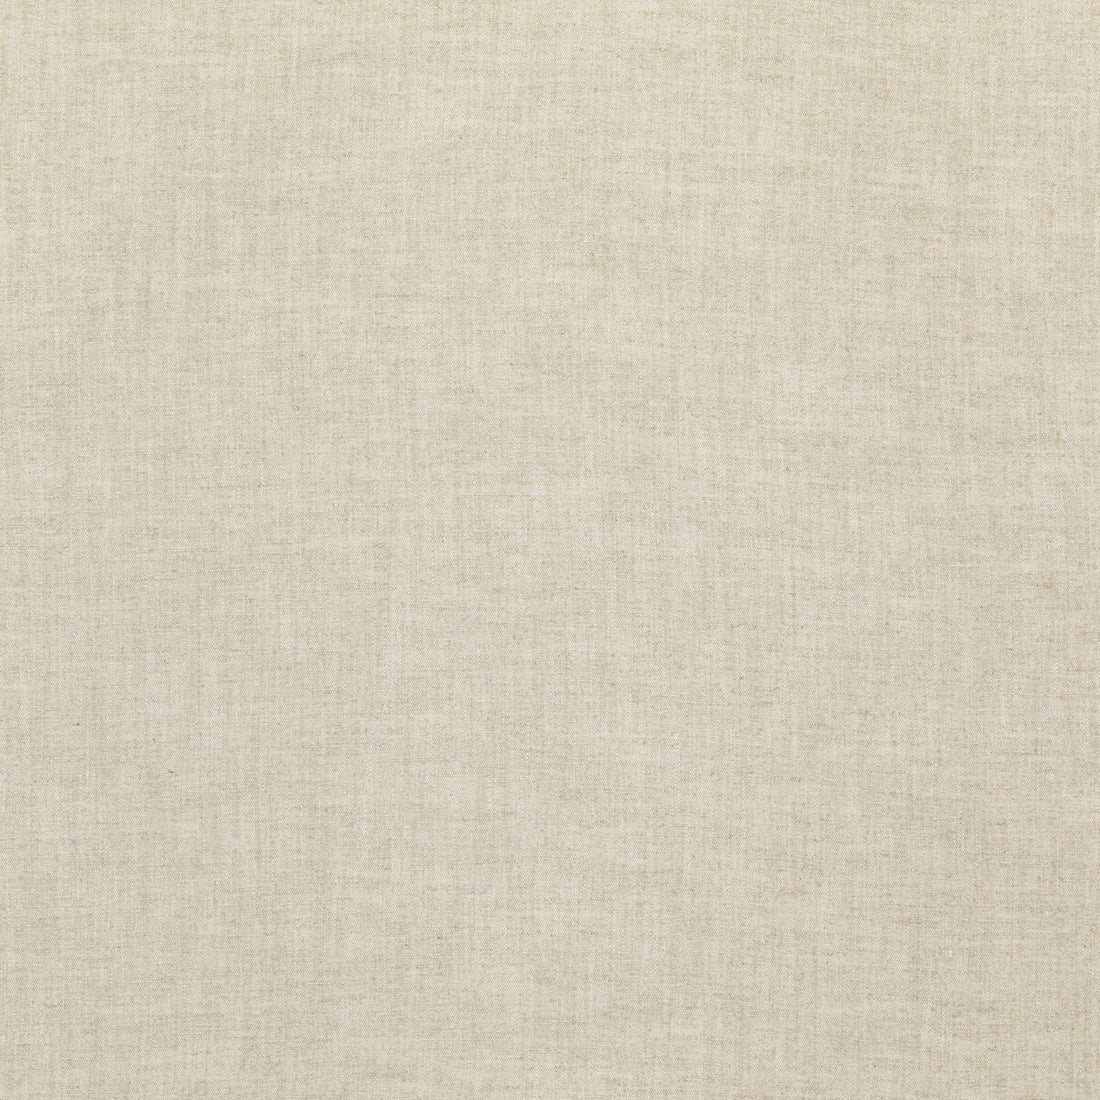 Ambrose fabric in parchment color - pattern ED85299.225.0 - by Threads in the Luxury Weaves collection